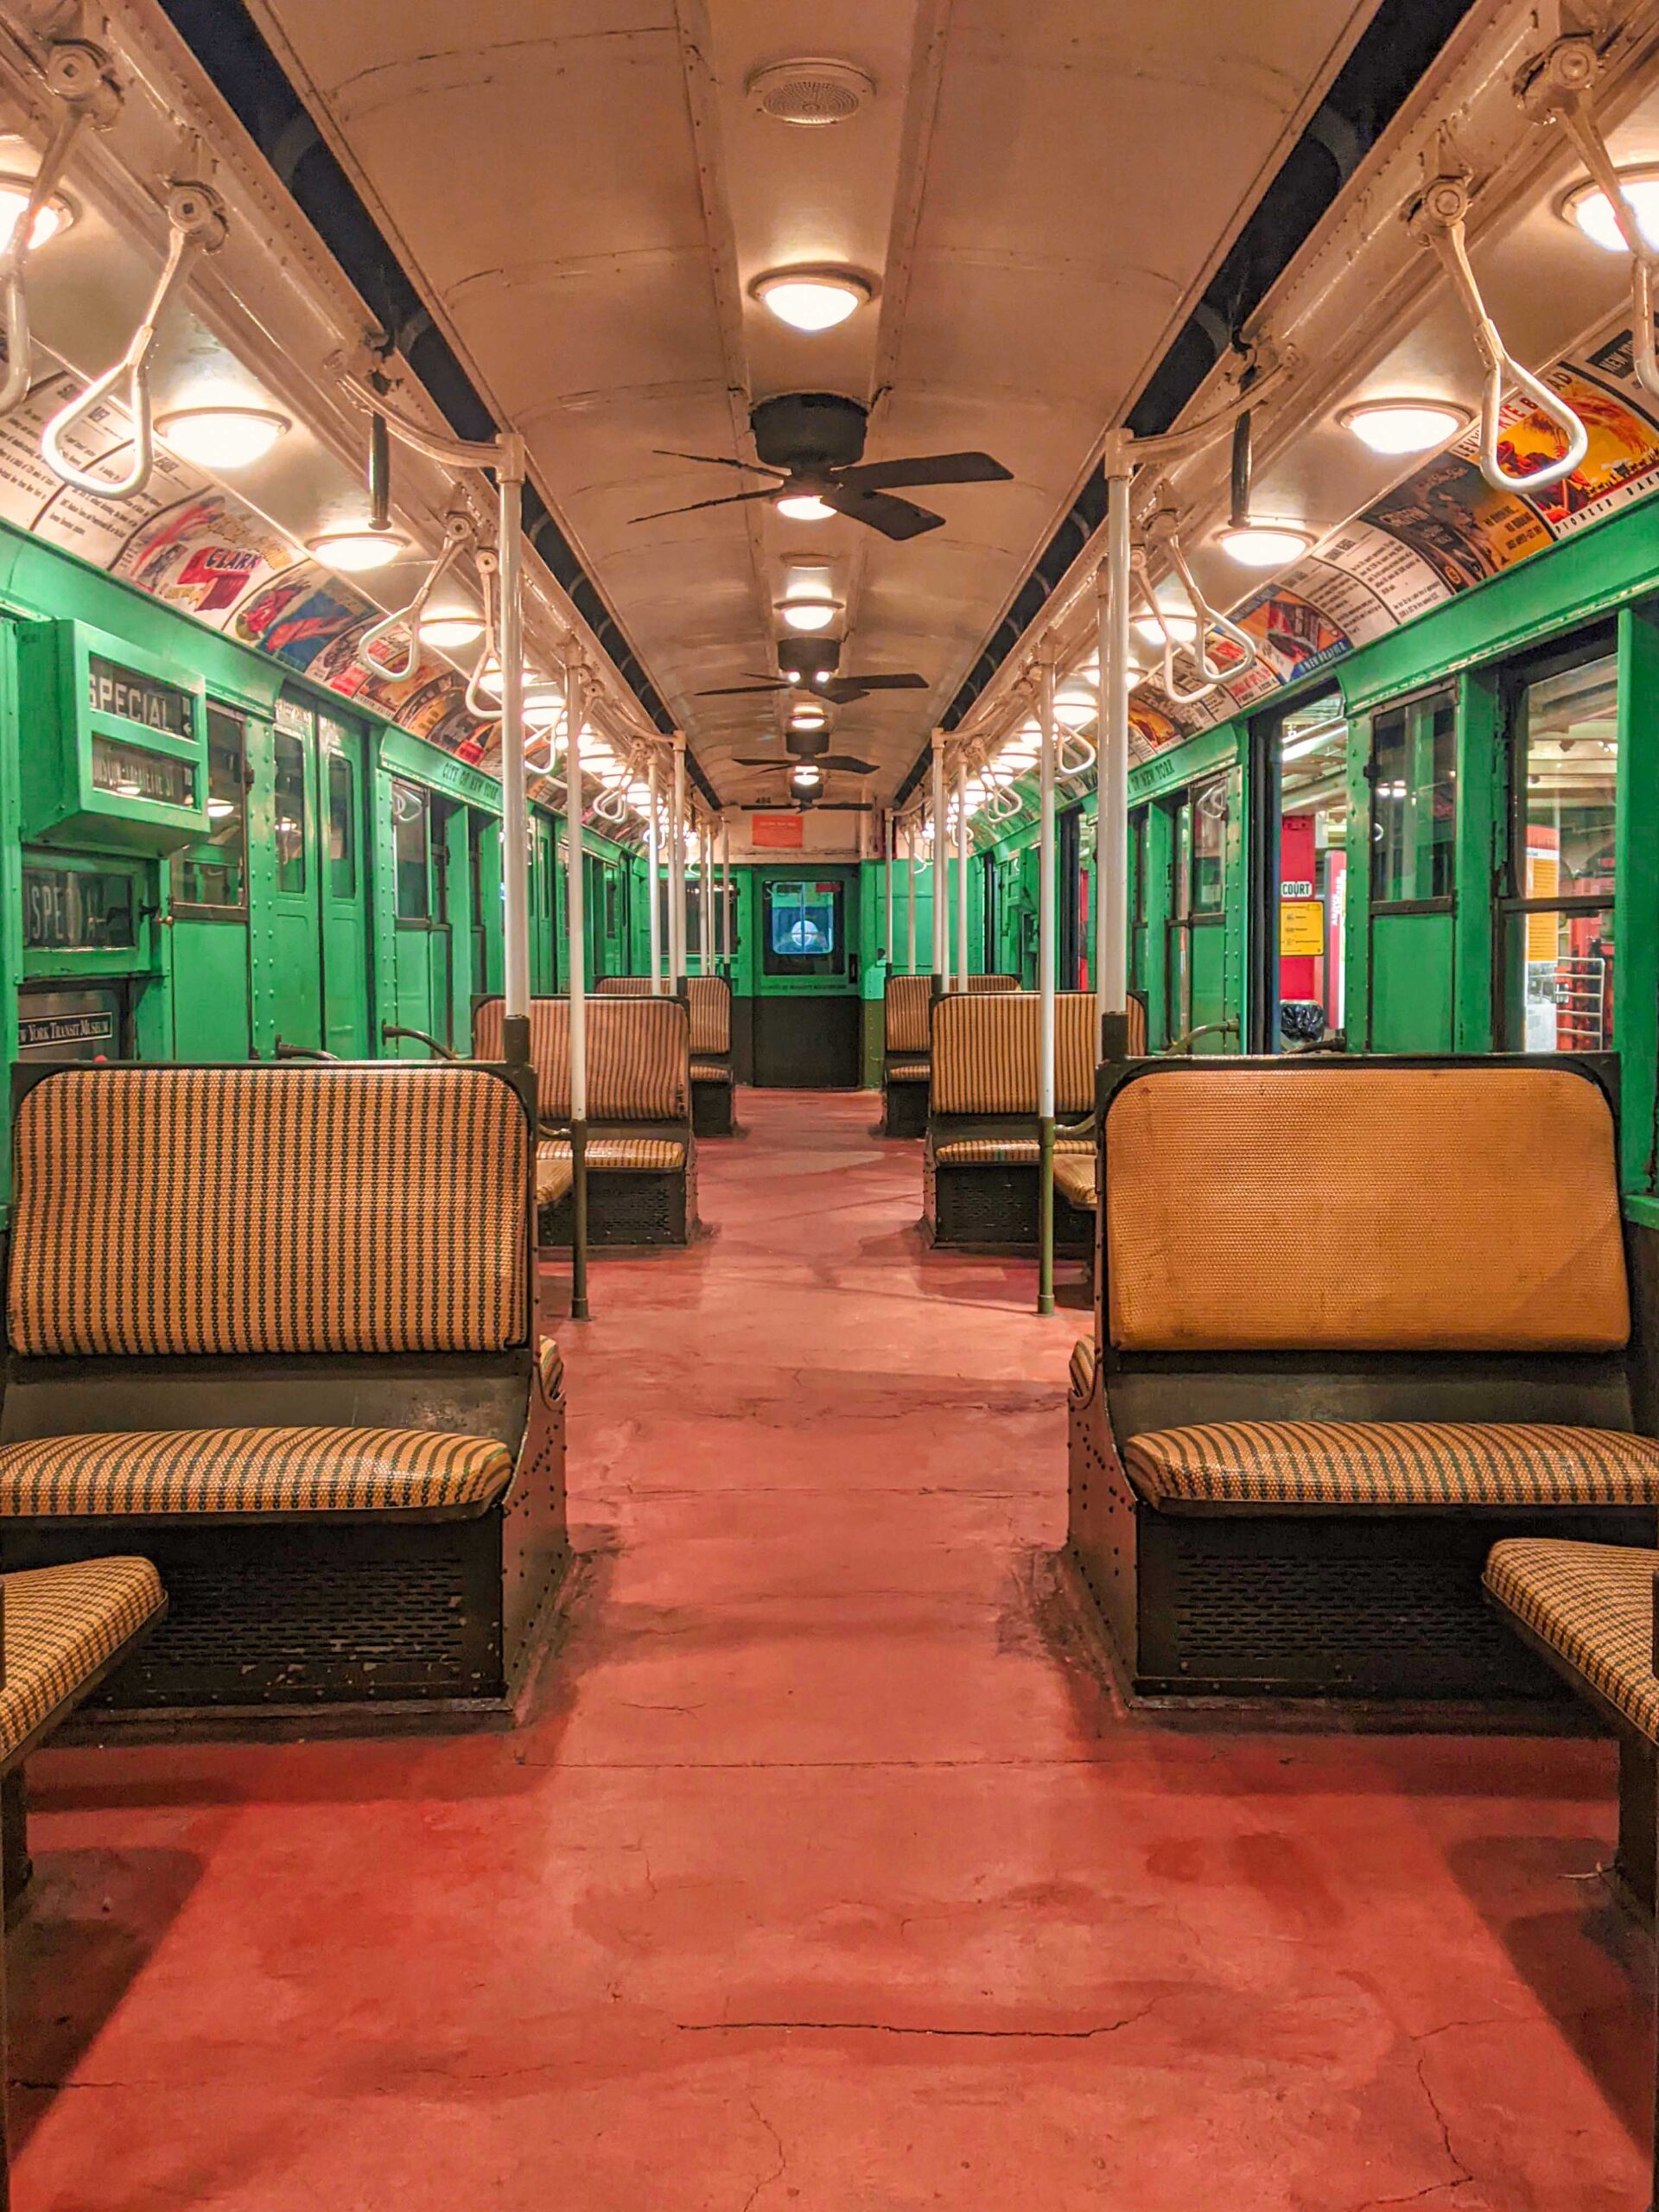 Inside a Wes Anderson-Designed Luxury Train